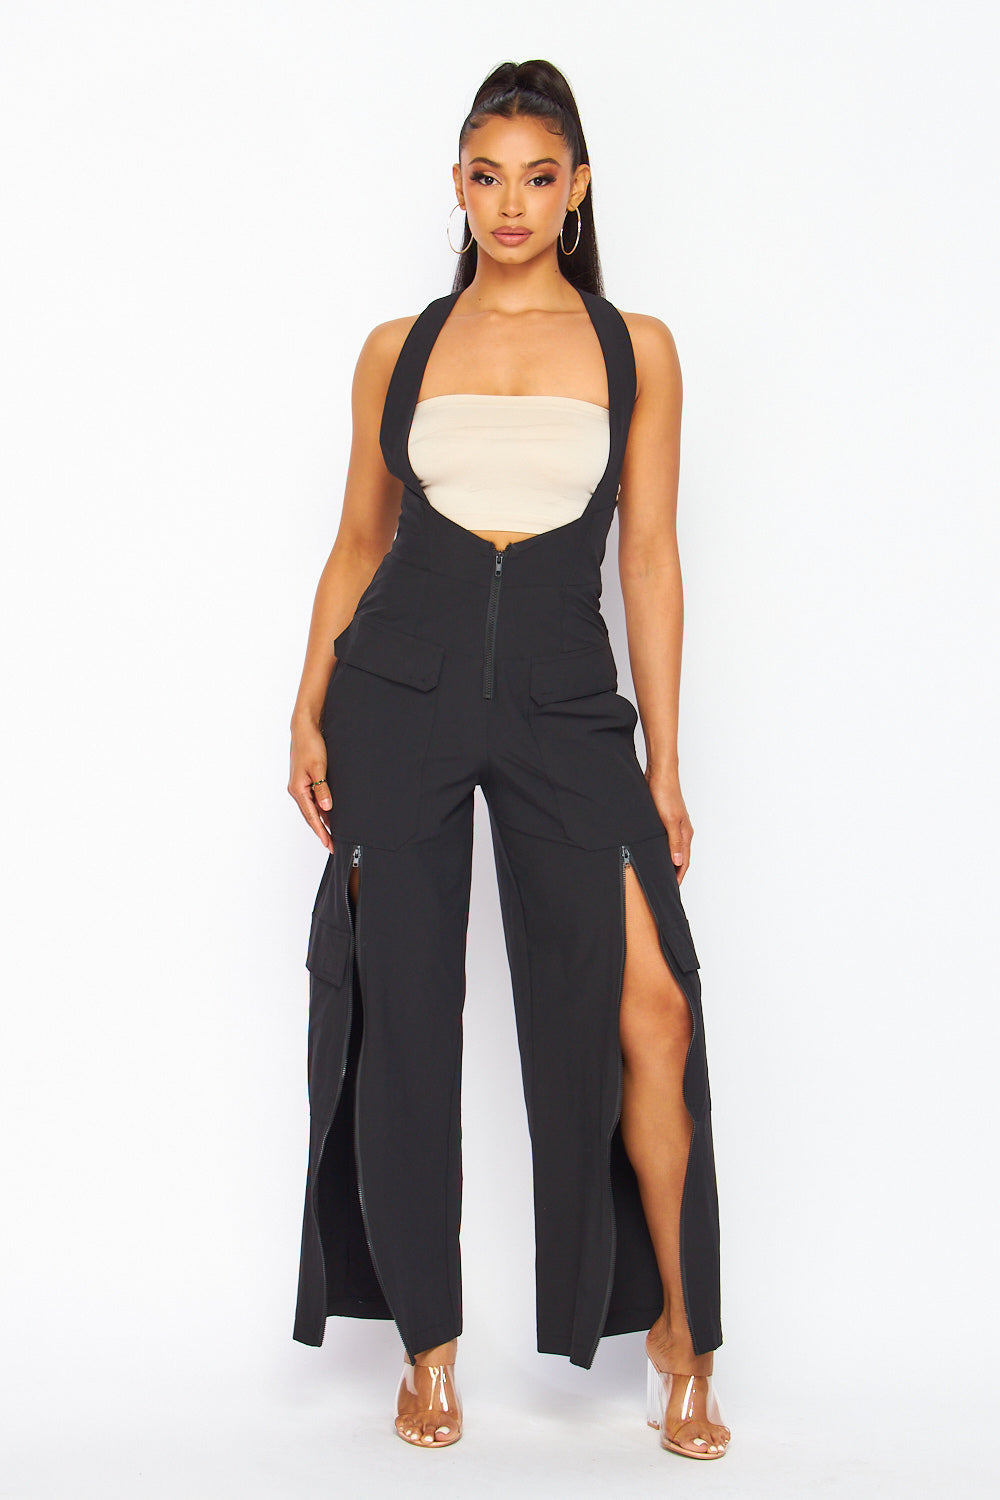 Choose Me Nylon Cargo Pocket Pant Overall Jumpsuit